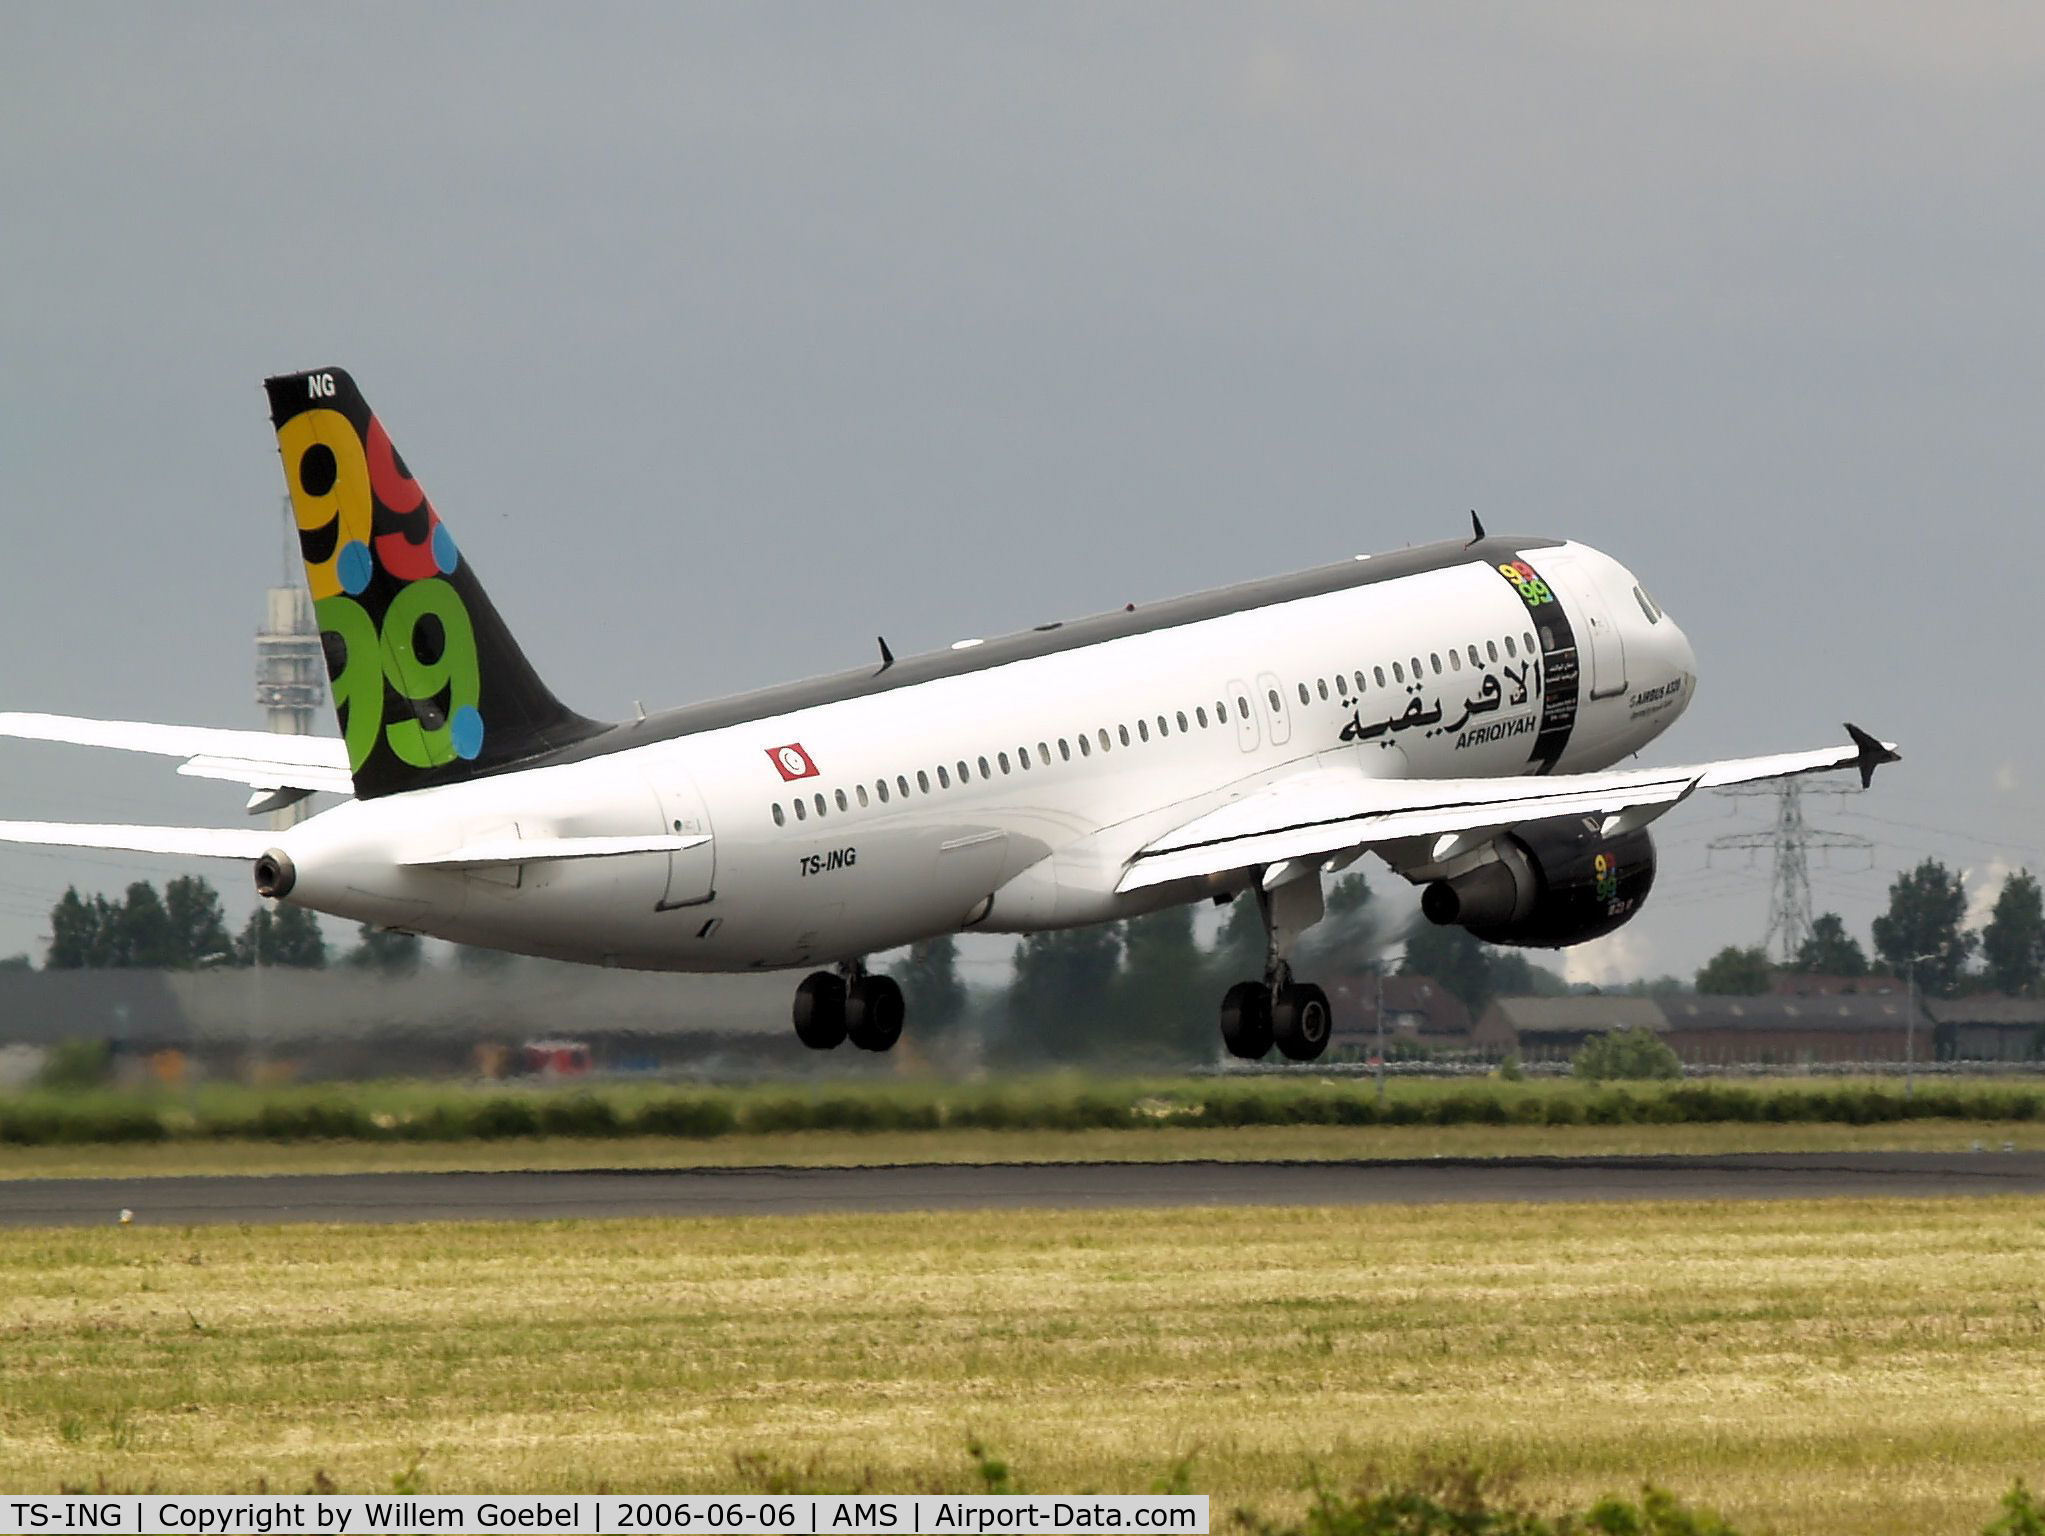 TS-ING, 1990 Airbus A320-211 C/N 140, Take off from runway L36 of Amsterdam Airport